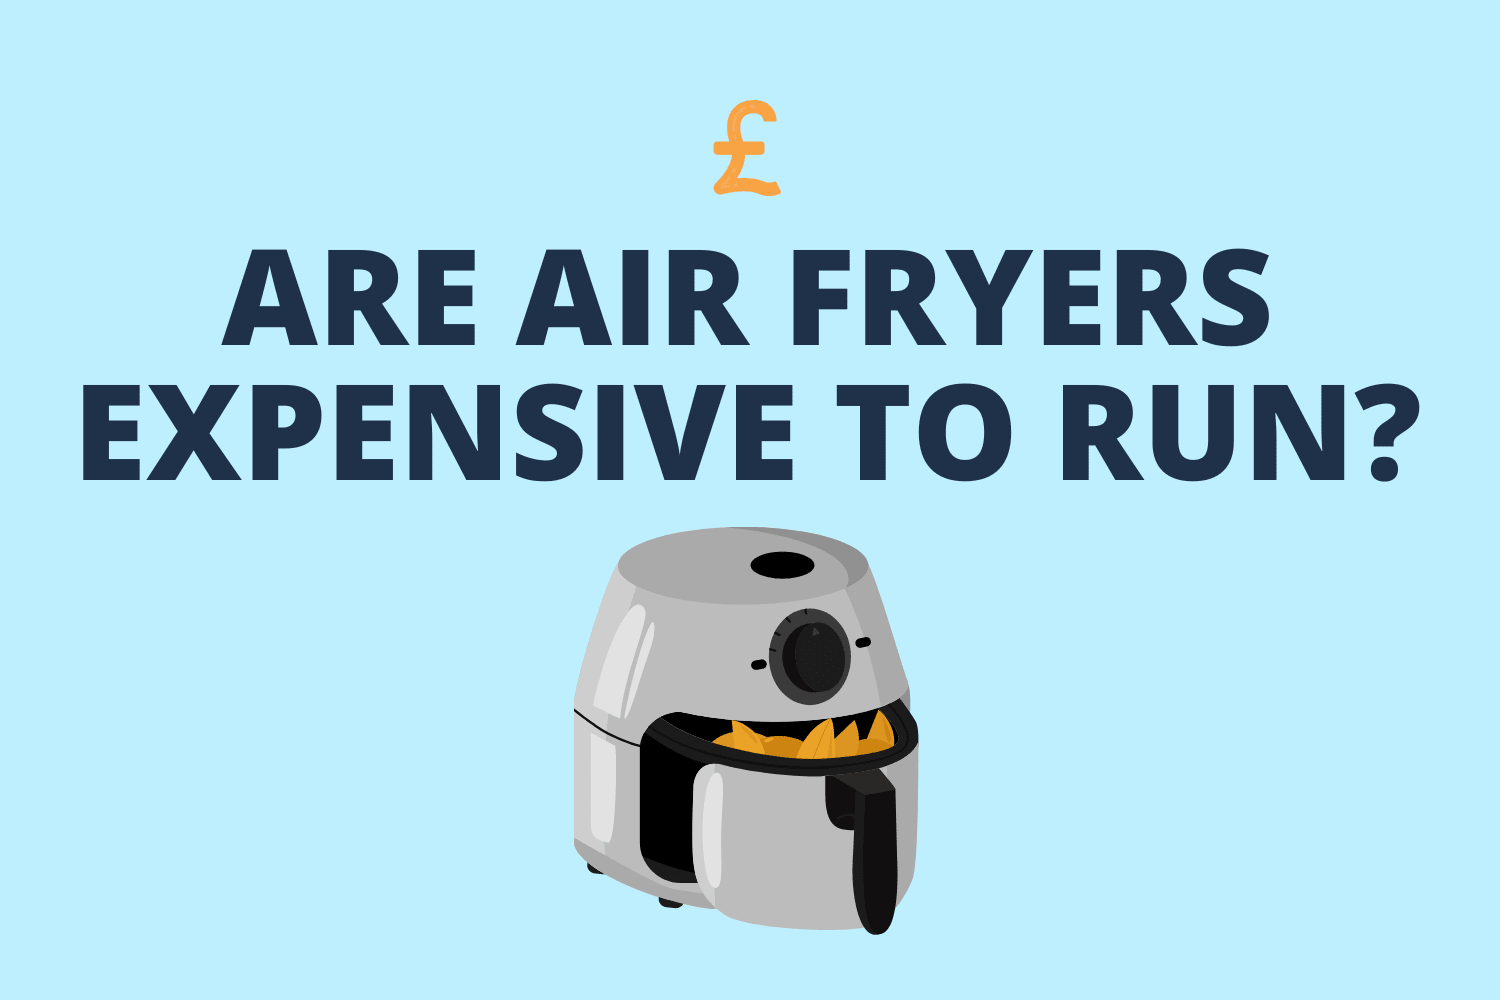 are air fryers expensive to run with pound sign and air fryer graphic